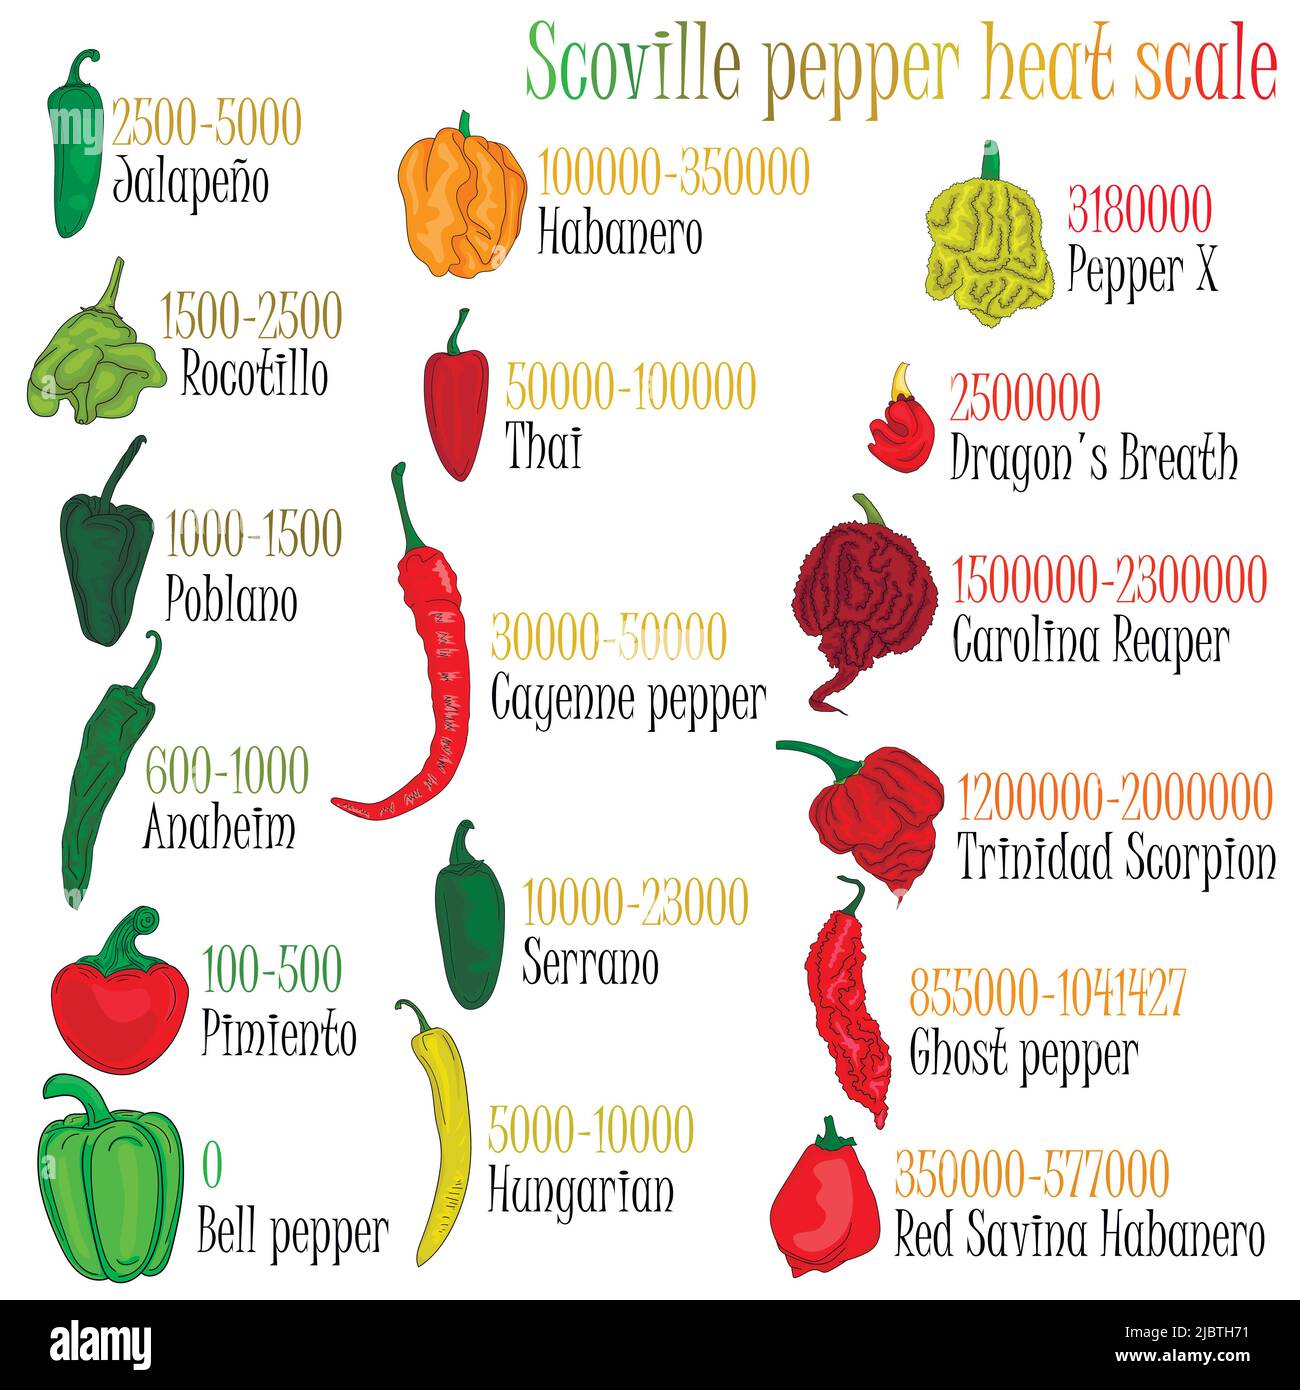 Scoville pepper heat scale. Pepper illustration from sweetest to very hot. Stock Vector